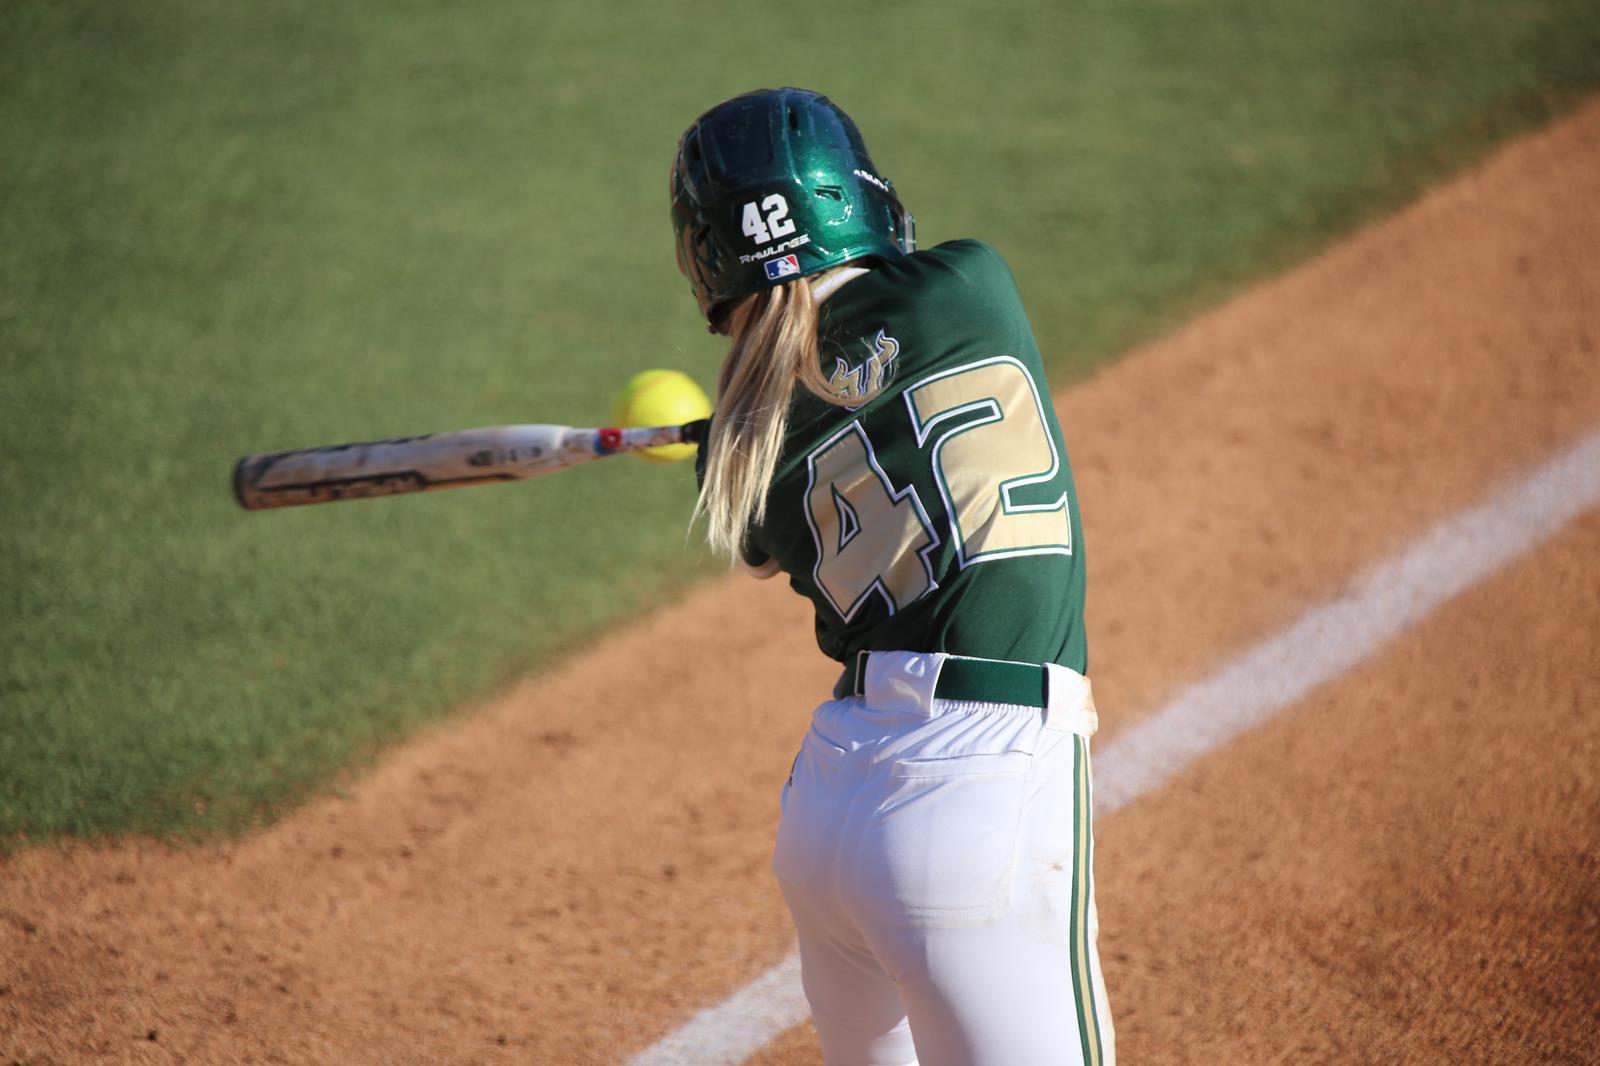 USF softball continues to rack up awards